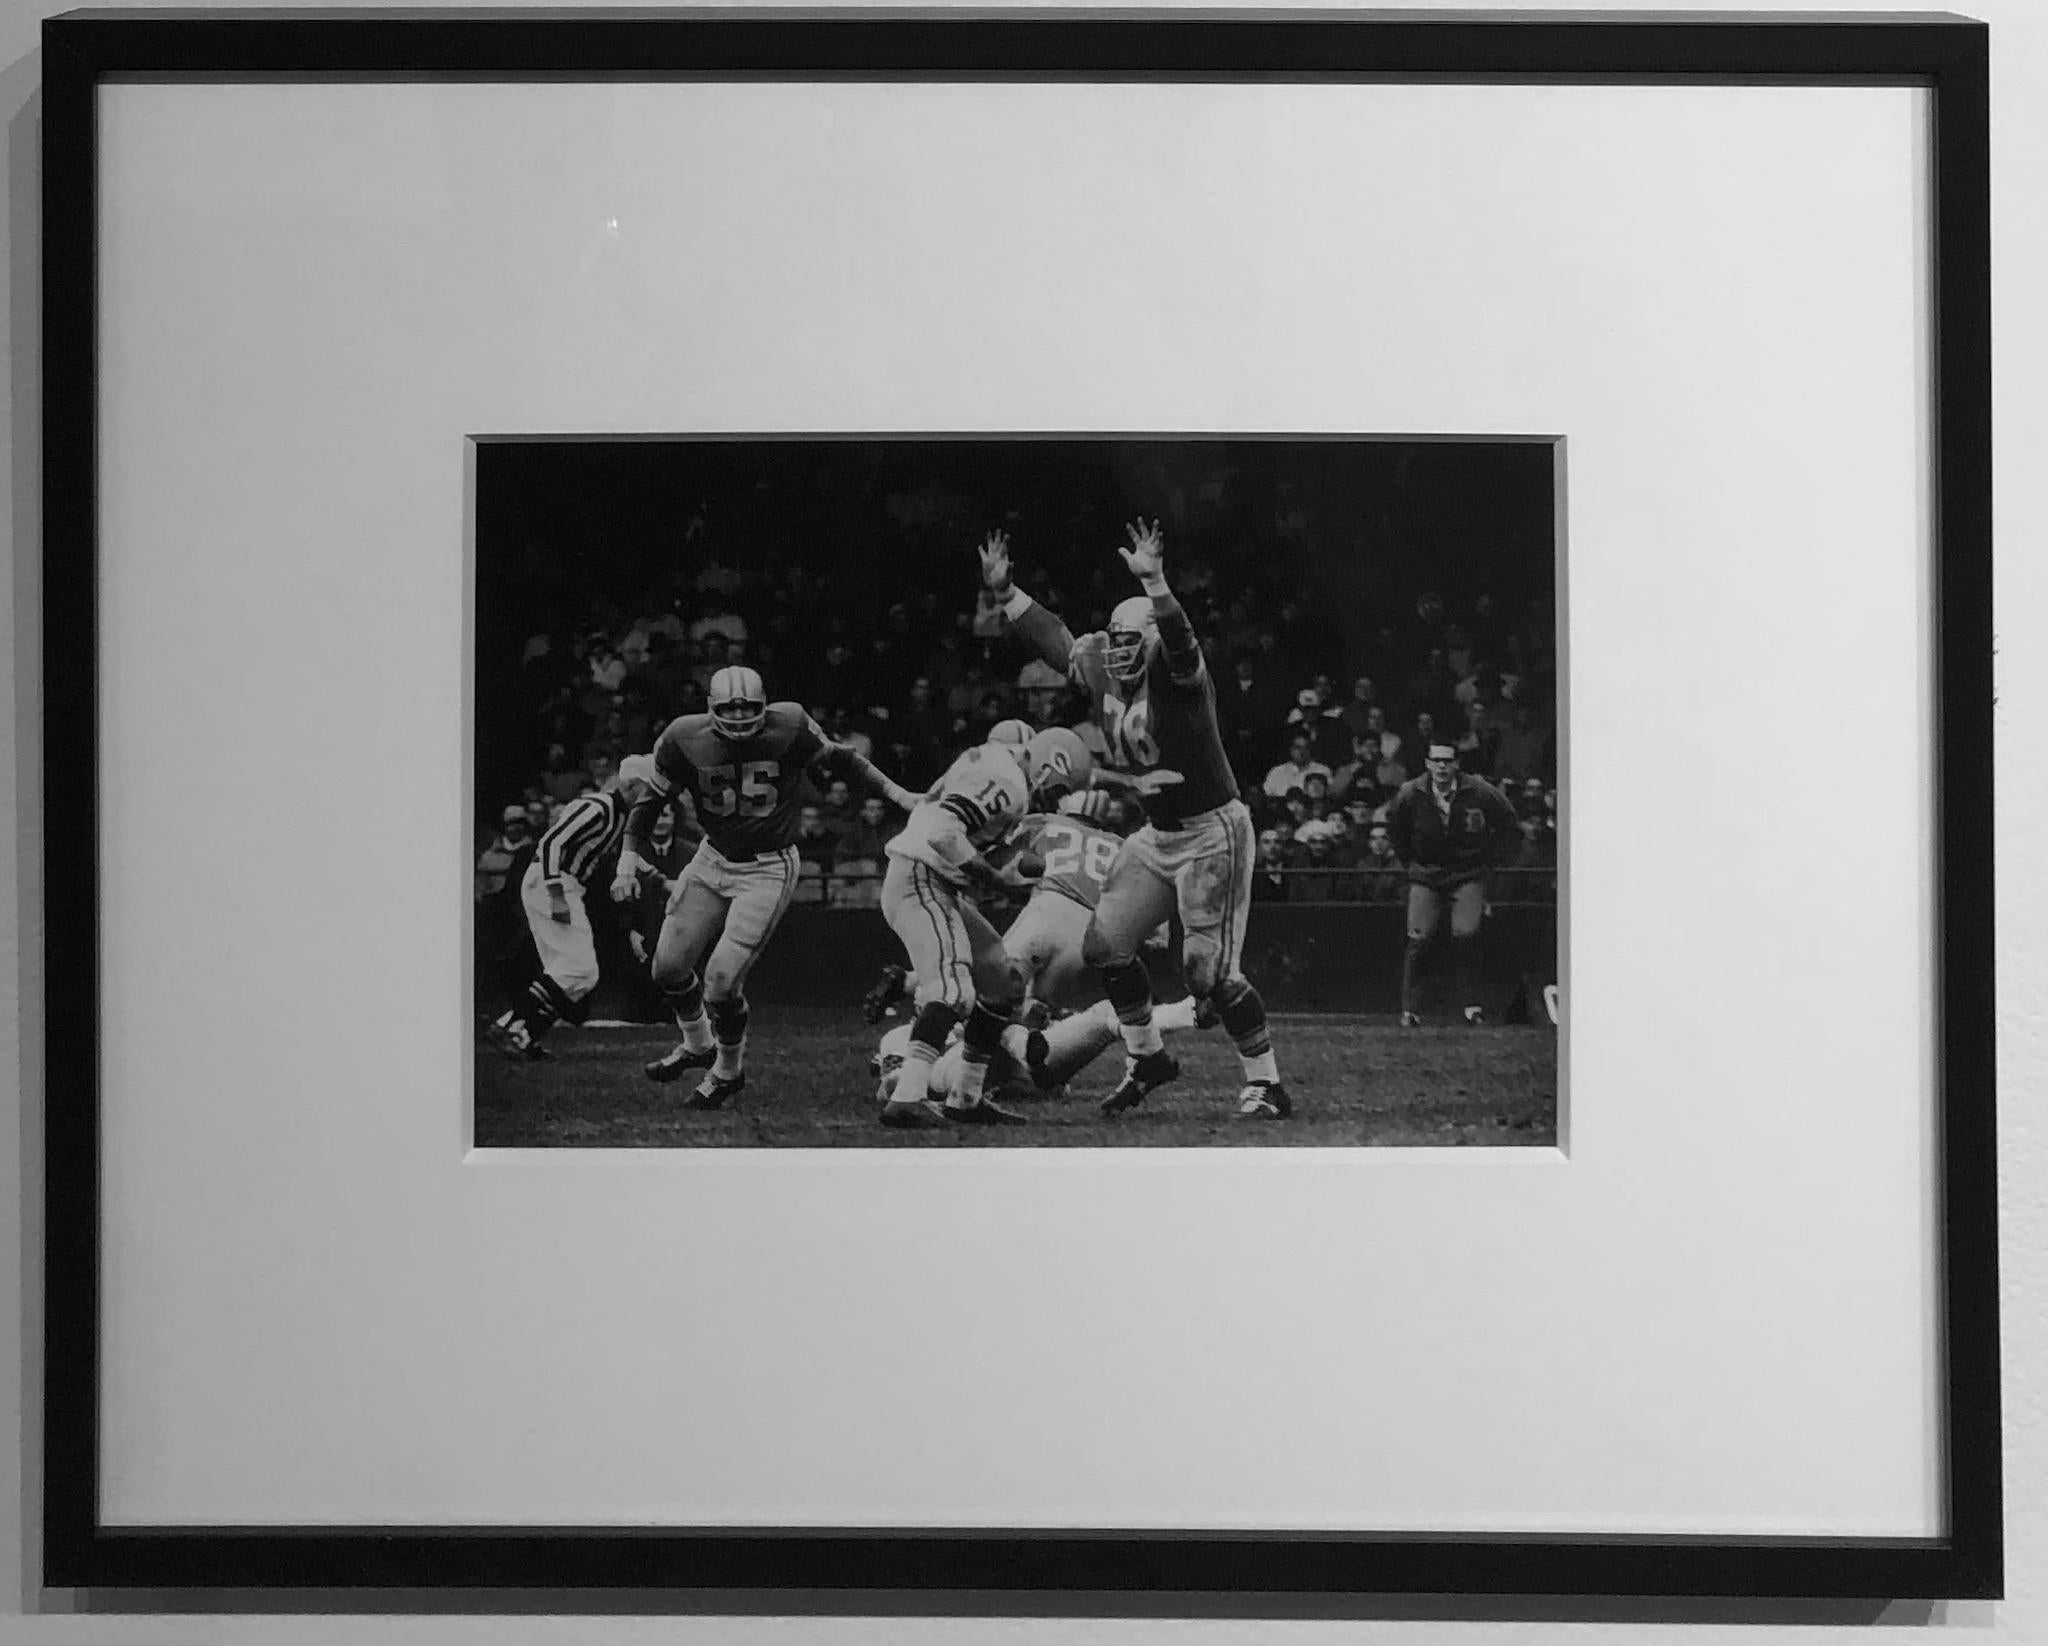 Green Bay Packer Bart Starr vs Detroit Lions Roger Brown, 1962 (vintage) - Photograph by Art Shay